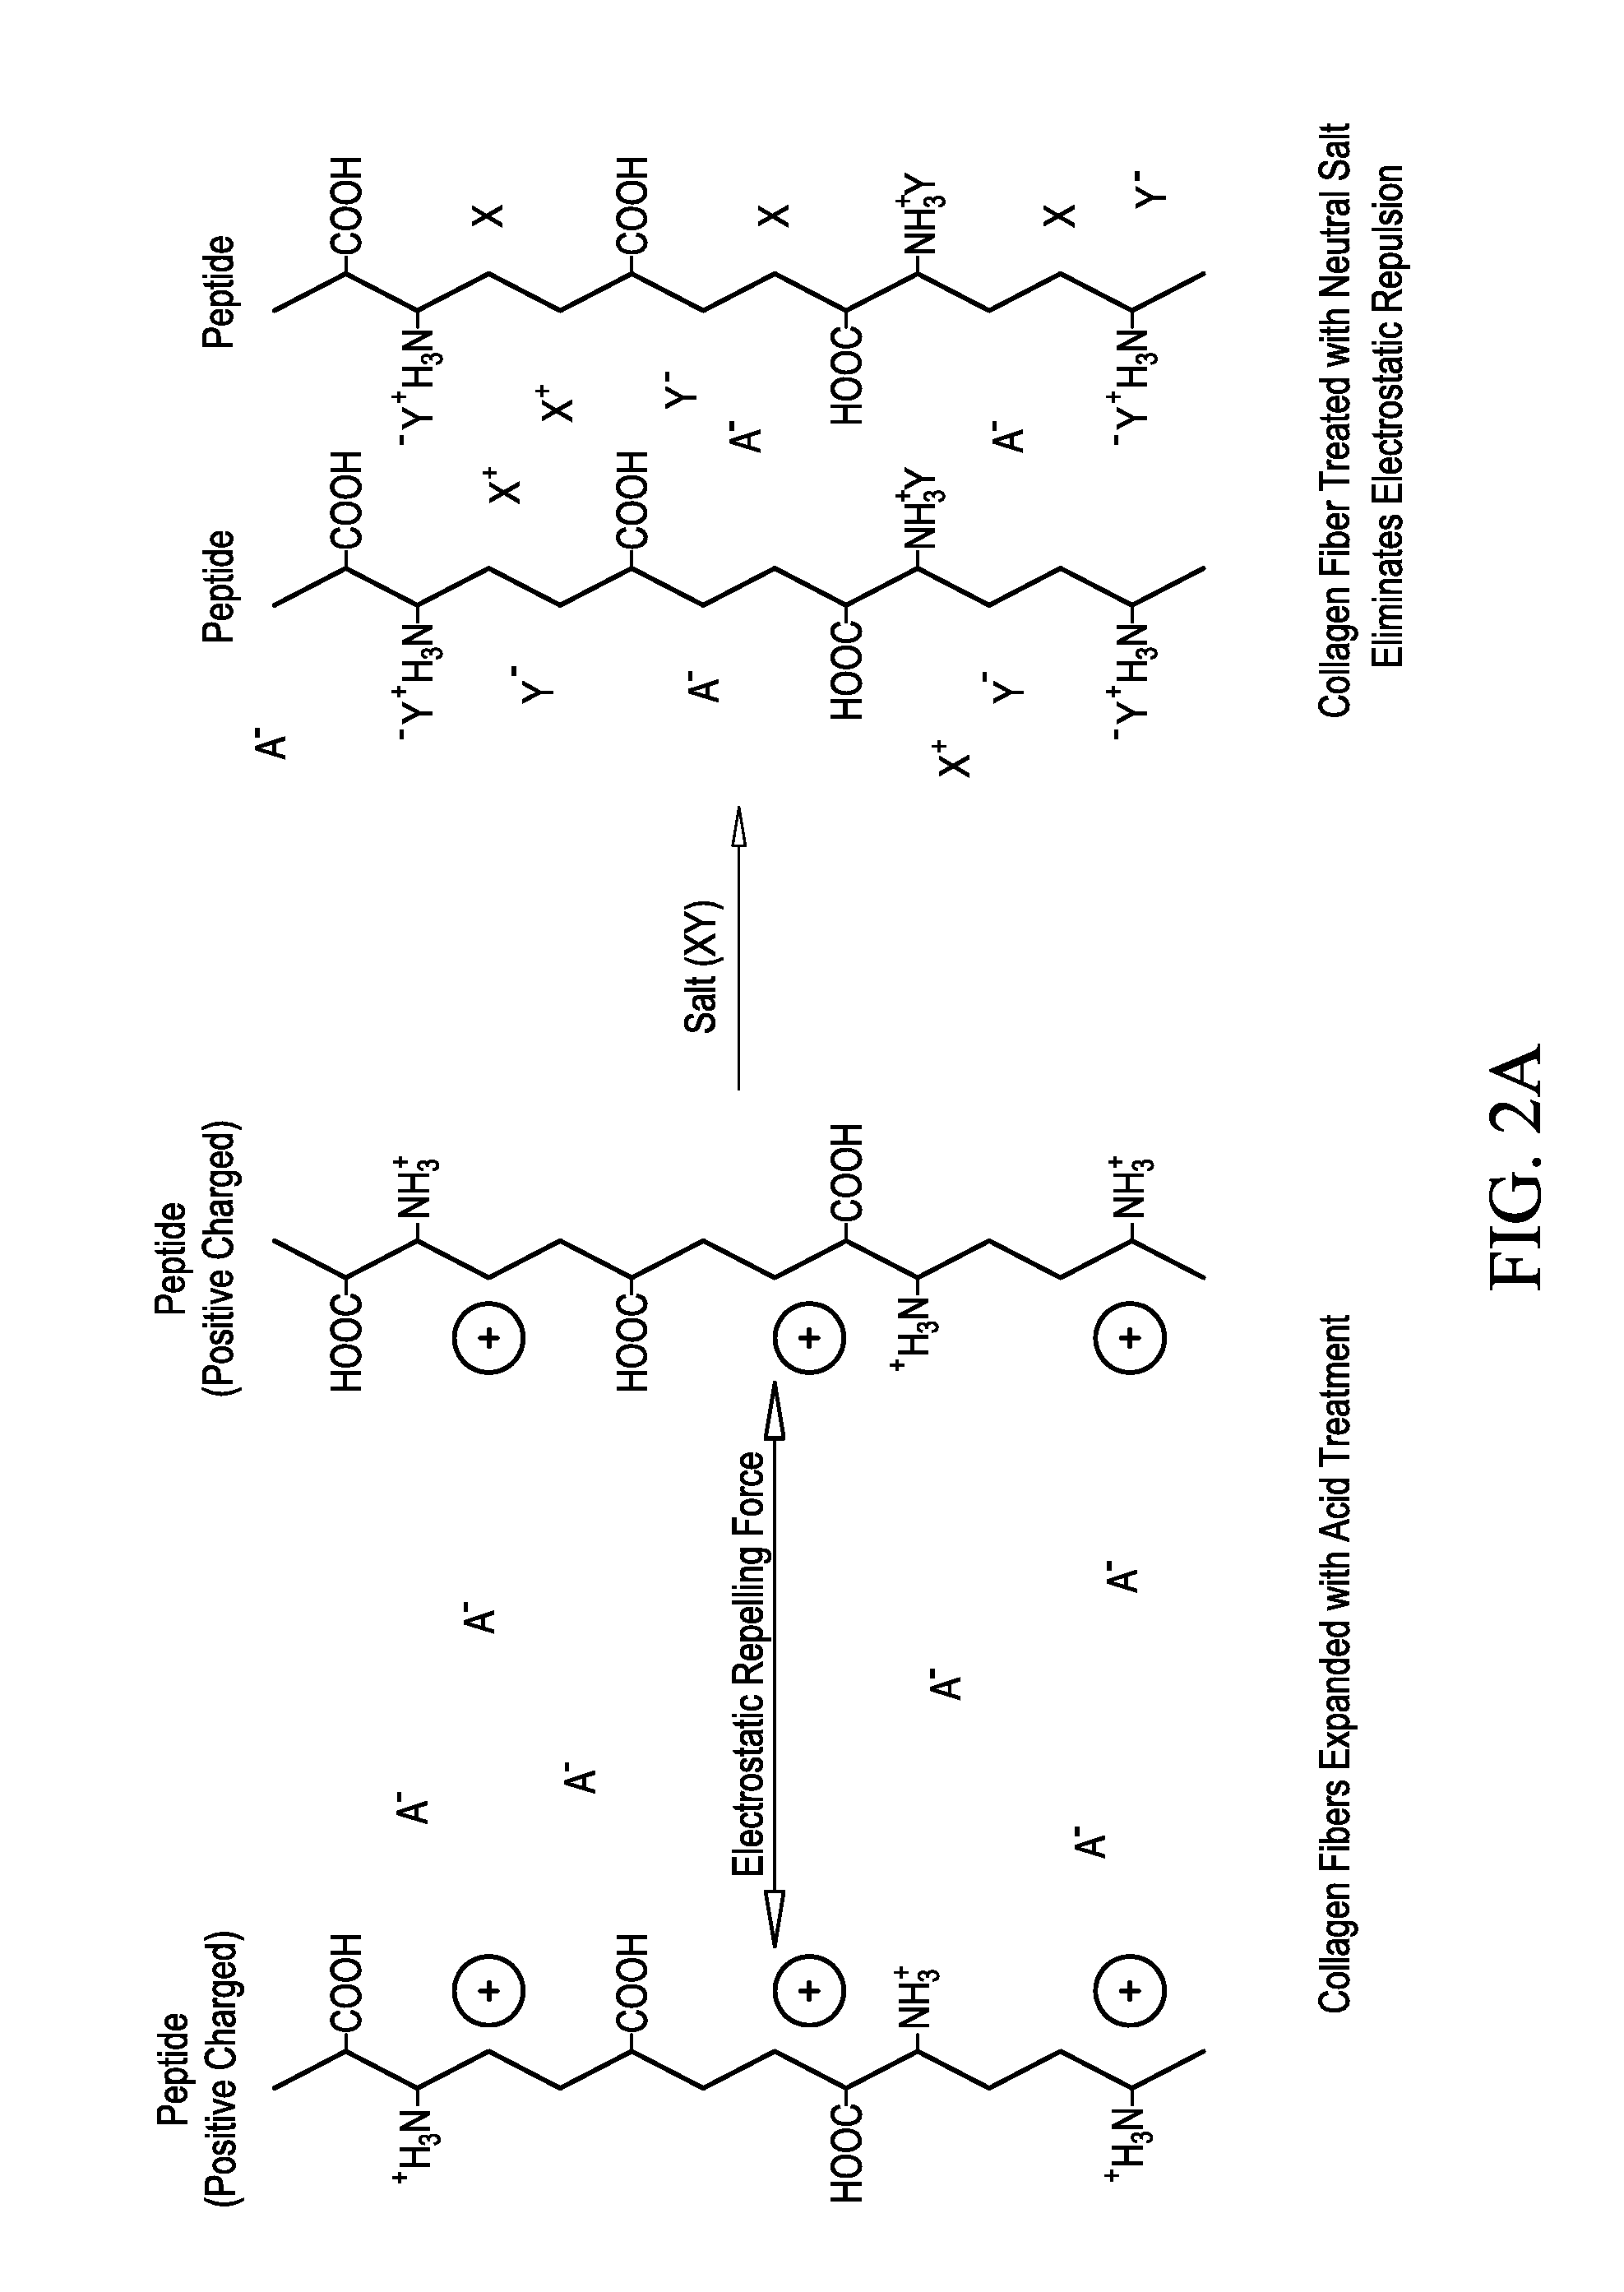 Collagen fiber reconstituted rawhide and process for making